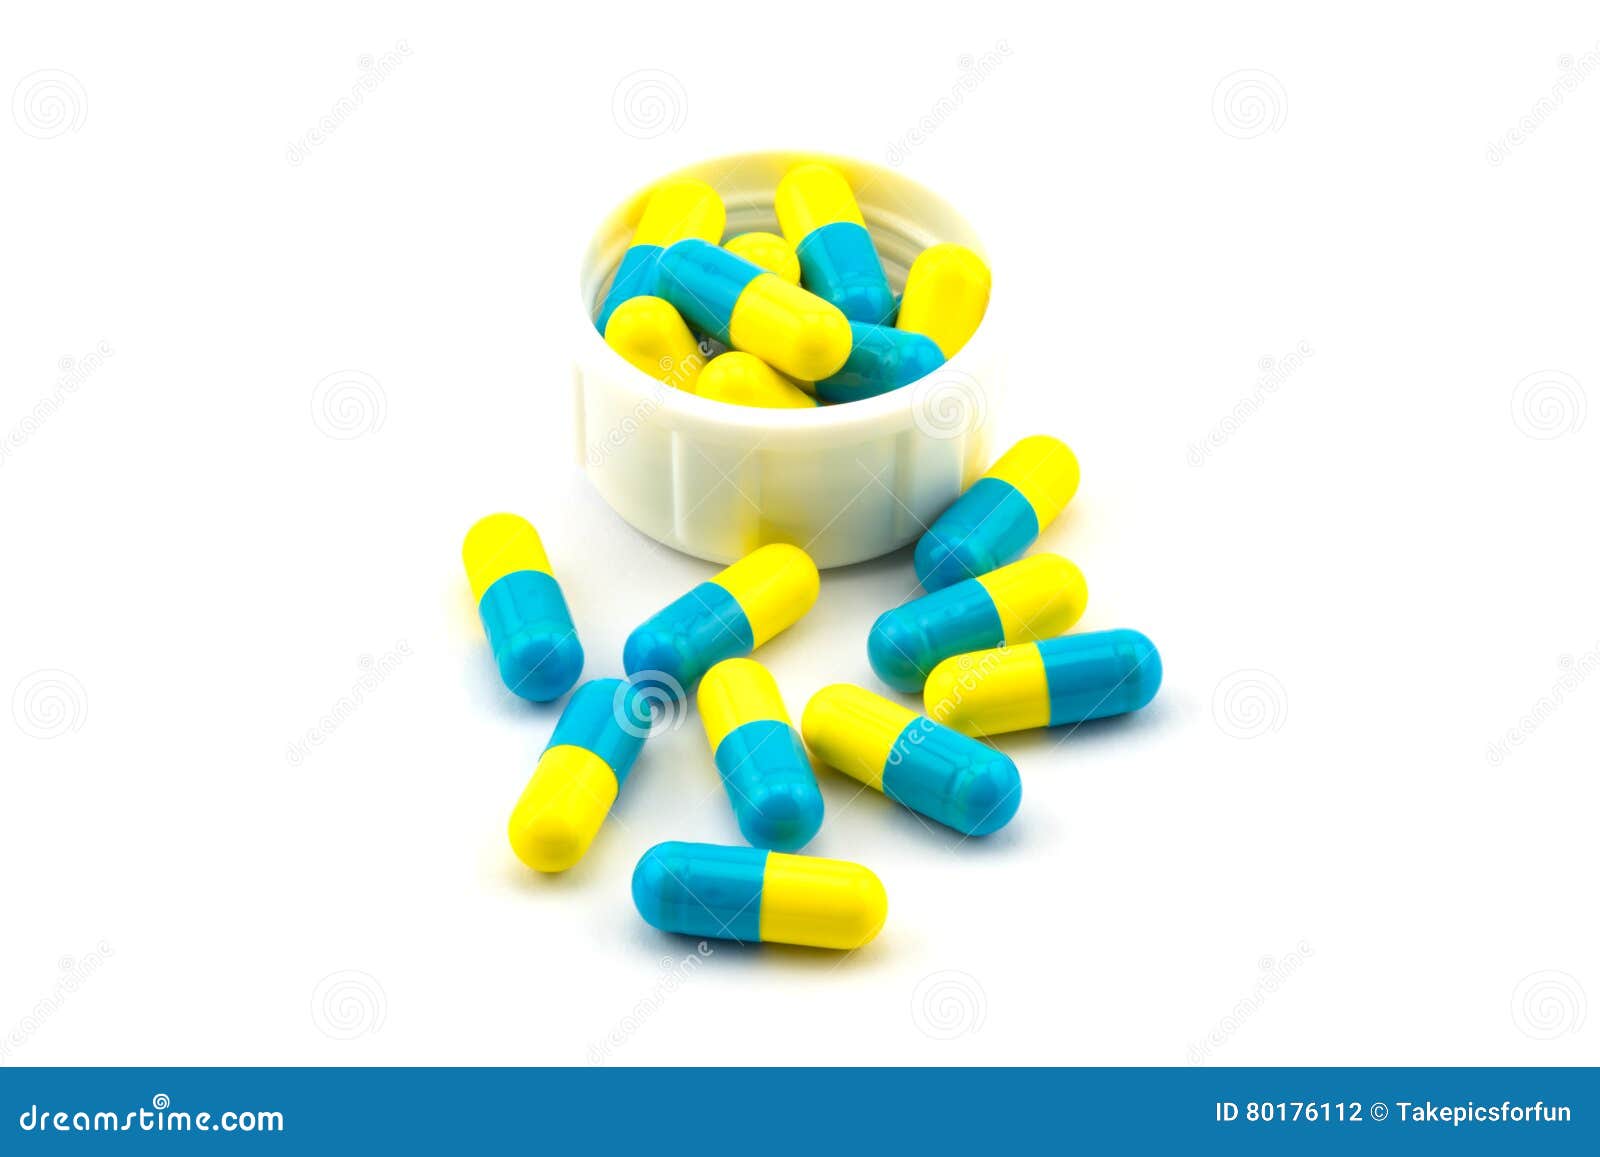 Blue And Yellow Medical Pills In Blister Stock Image Image of drug, chemist 104442123